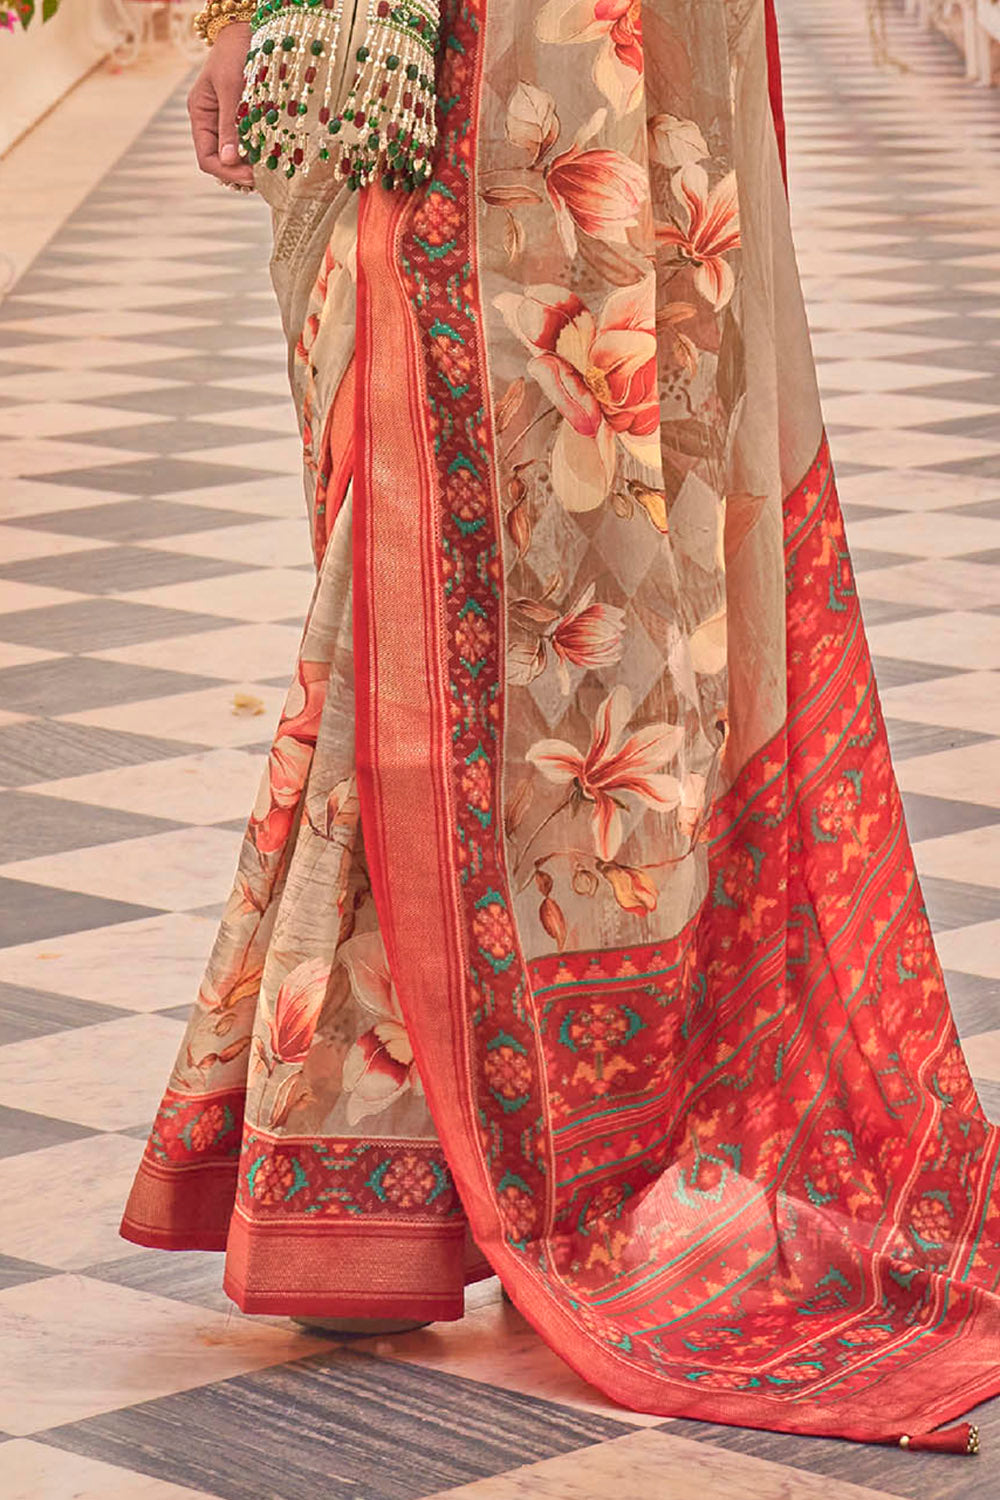 Beige with Red Soft Floral Printed Saree with Ekat Border and Pallu